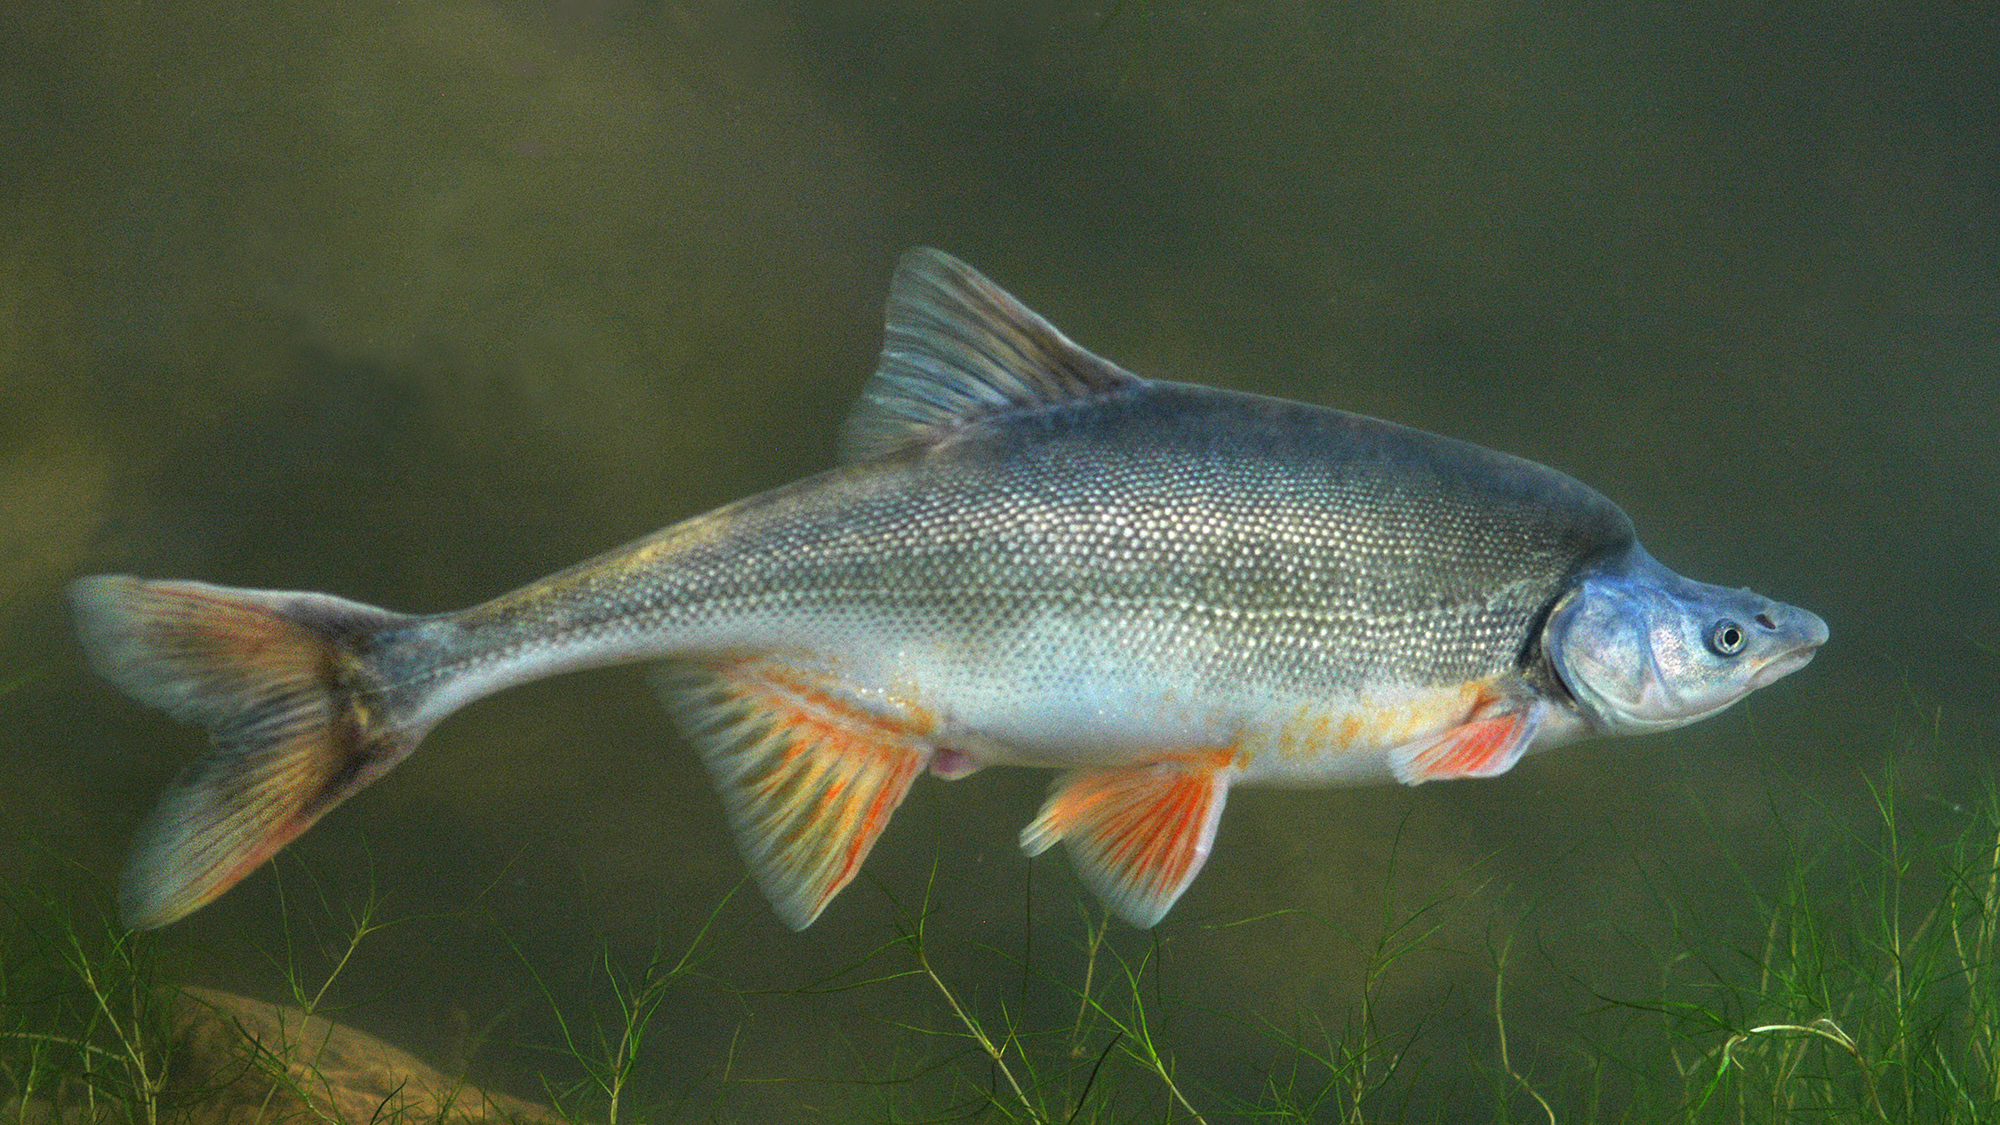 Humpback Chub a native AZ fish found in the Colorado River in the Grand Canyon. Photo © George Andrejko